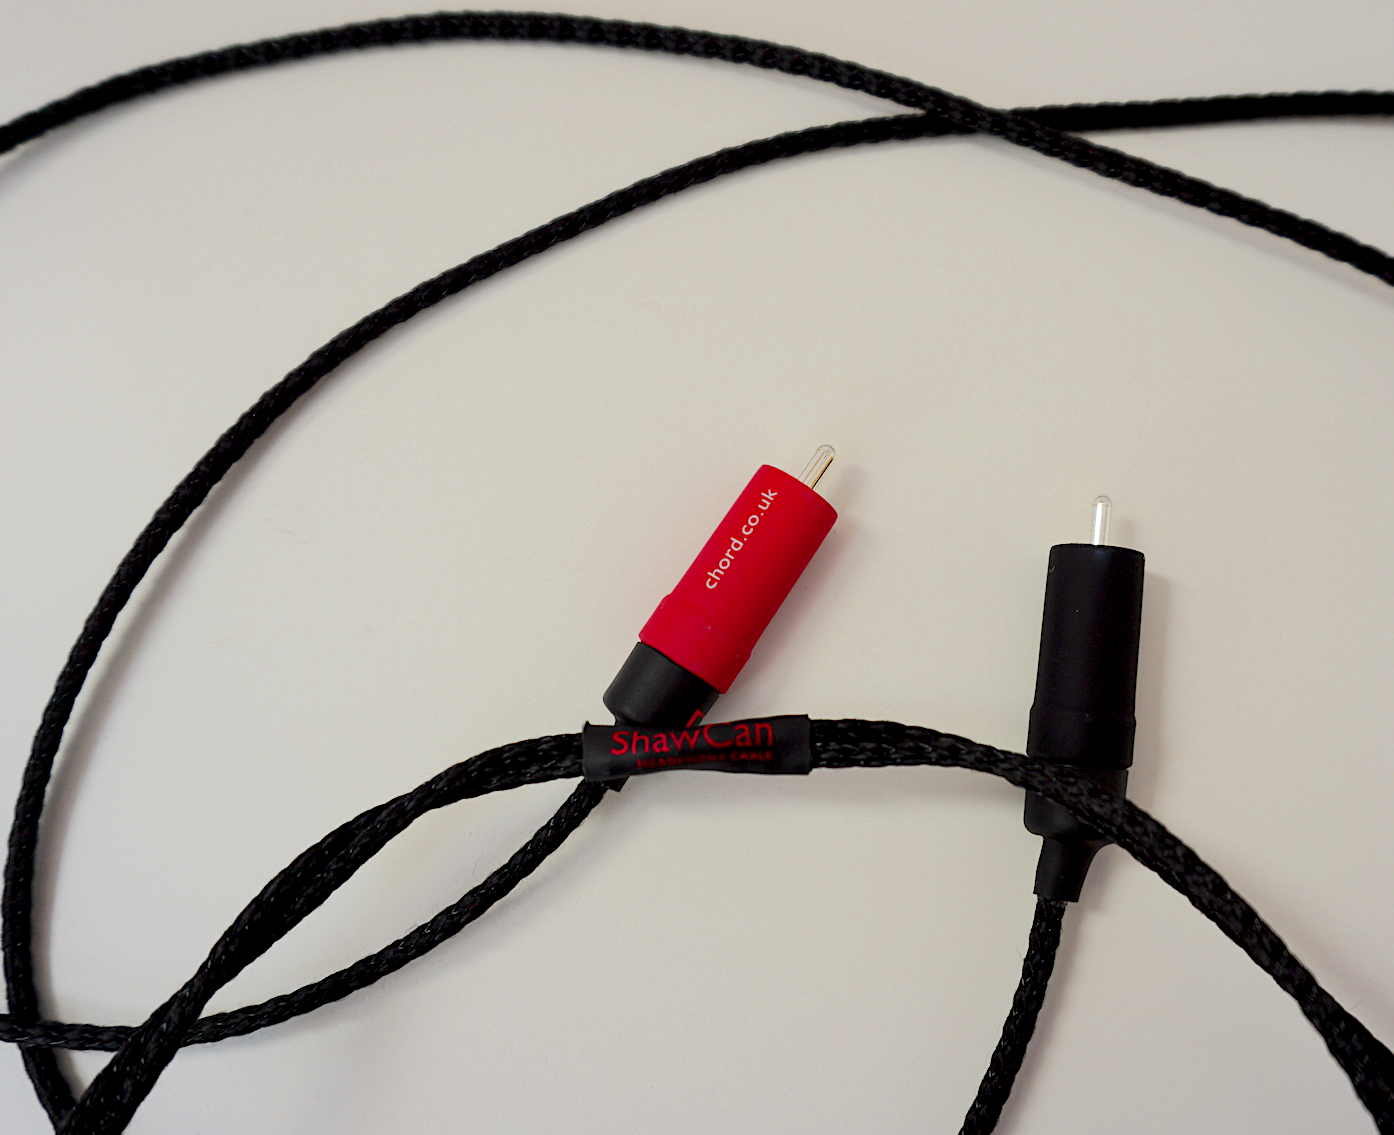 Bespoke Cables From Chord: Buy By Wire